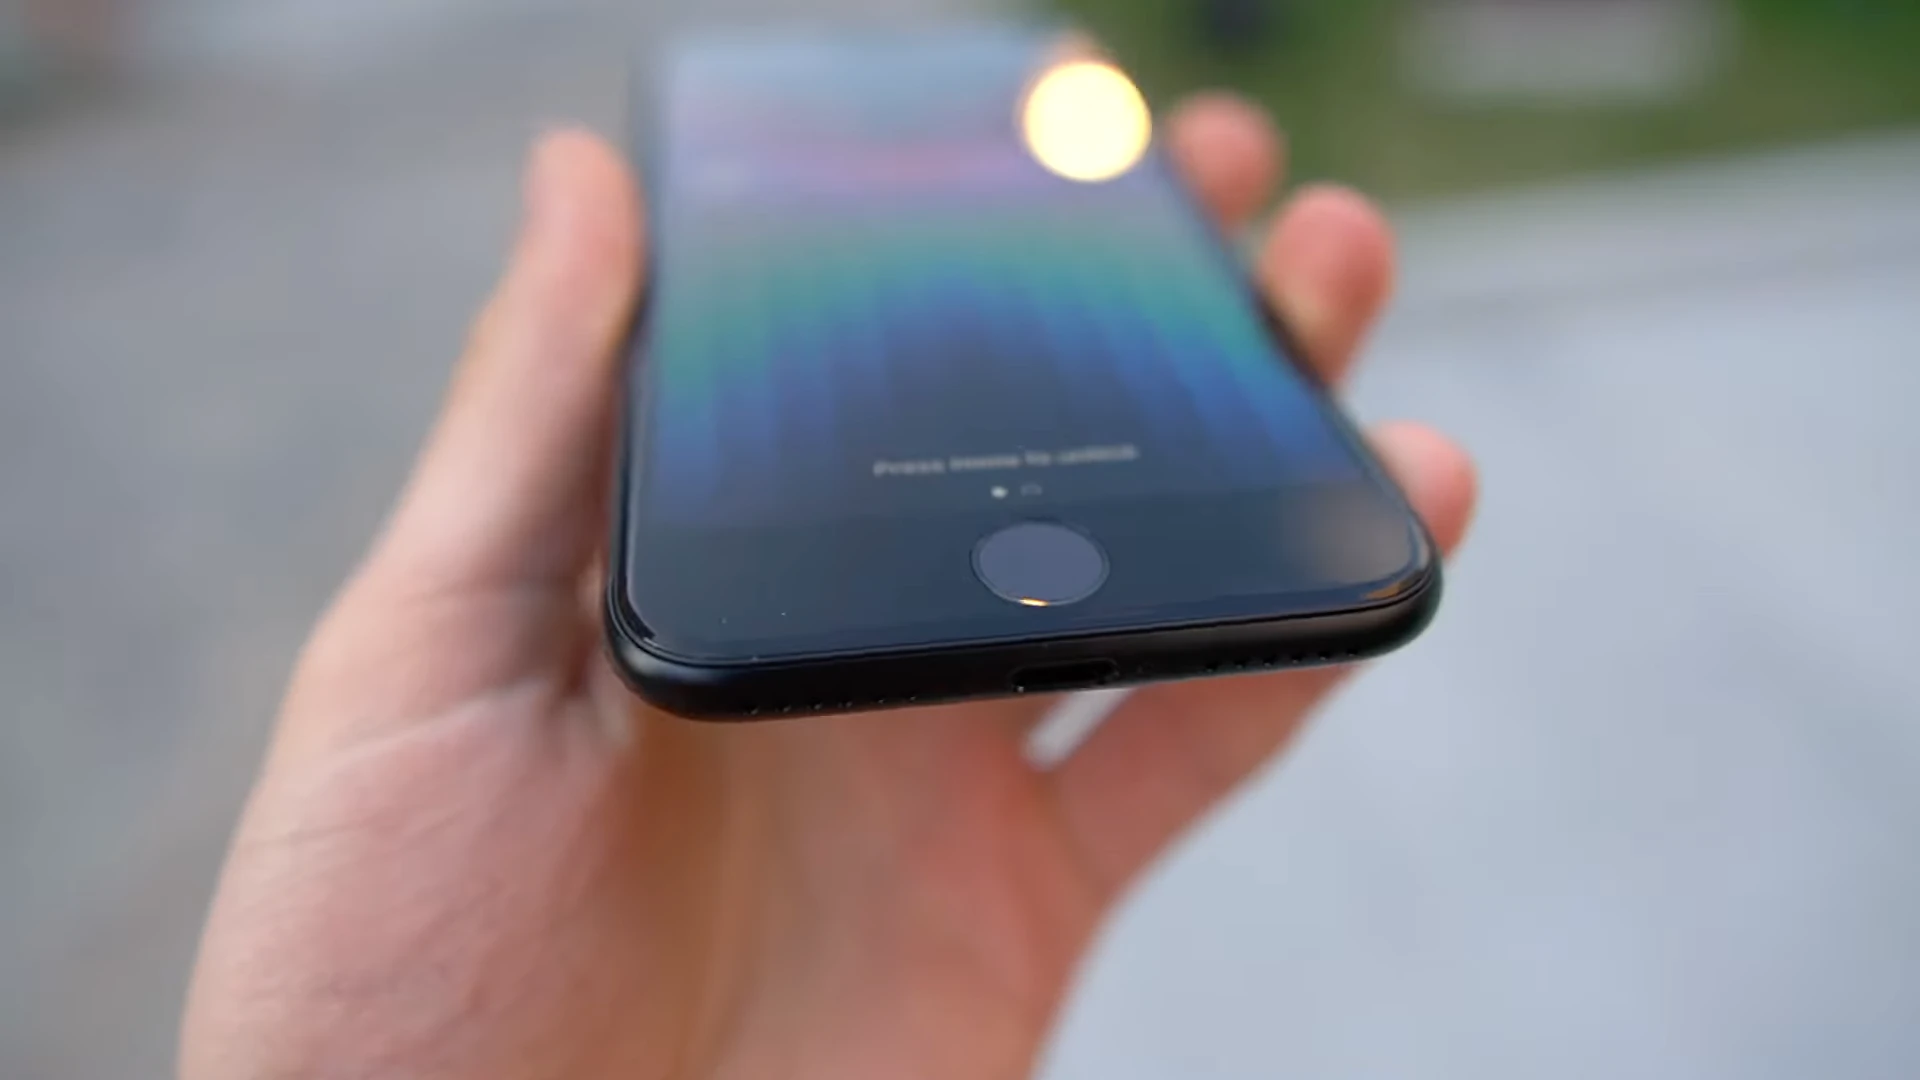 A top-down unboxing view showing a male's hands holding a black third-generation iPhone SE (model year 2022) with a focus on the Home button at the bottom